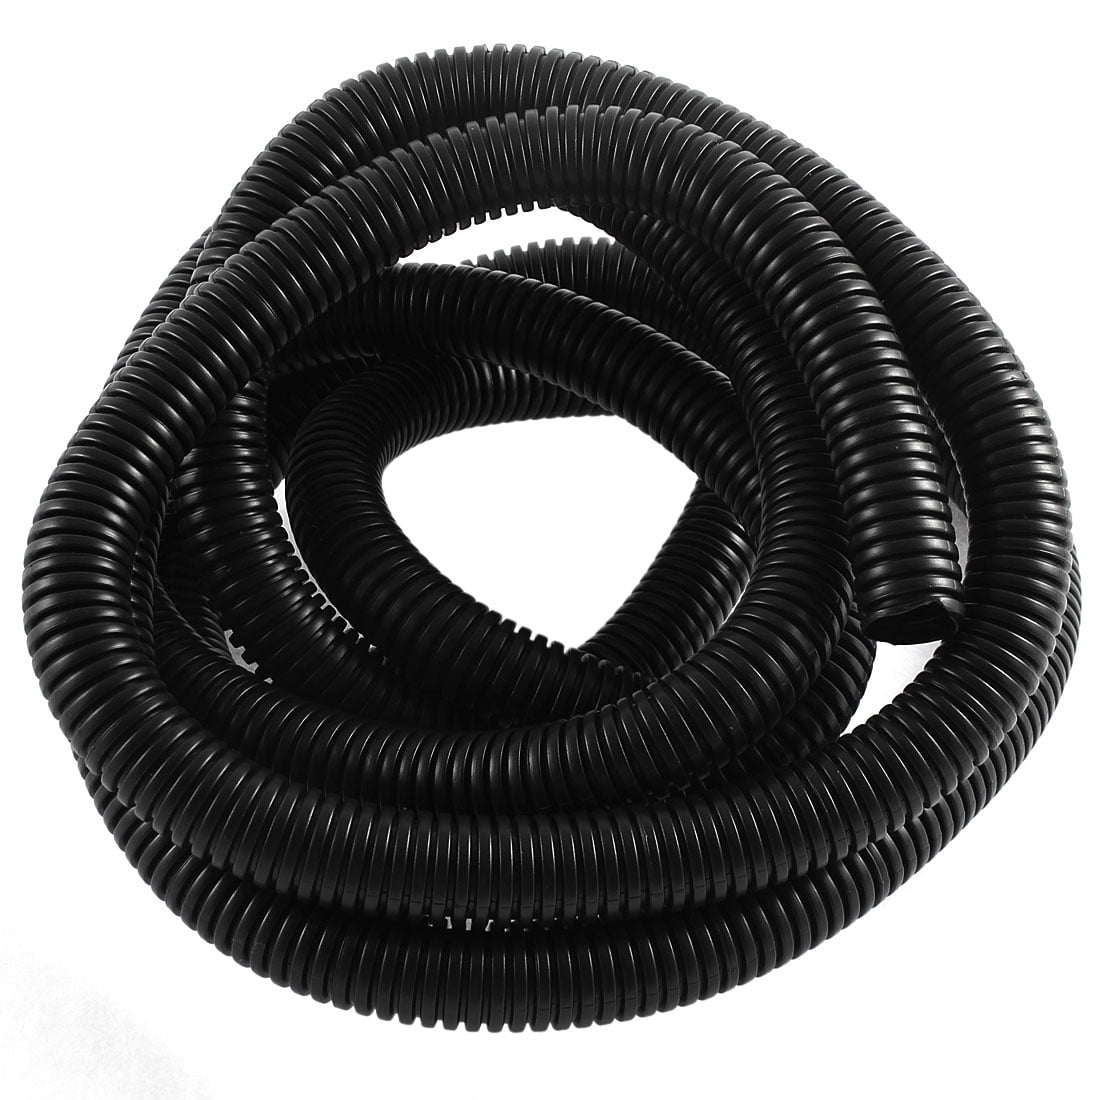 33Ft 10M Clear PVC Hose Tube Pipe-Flexible Plastic Tubing Water Delivery Garden 